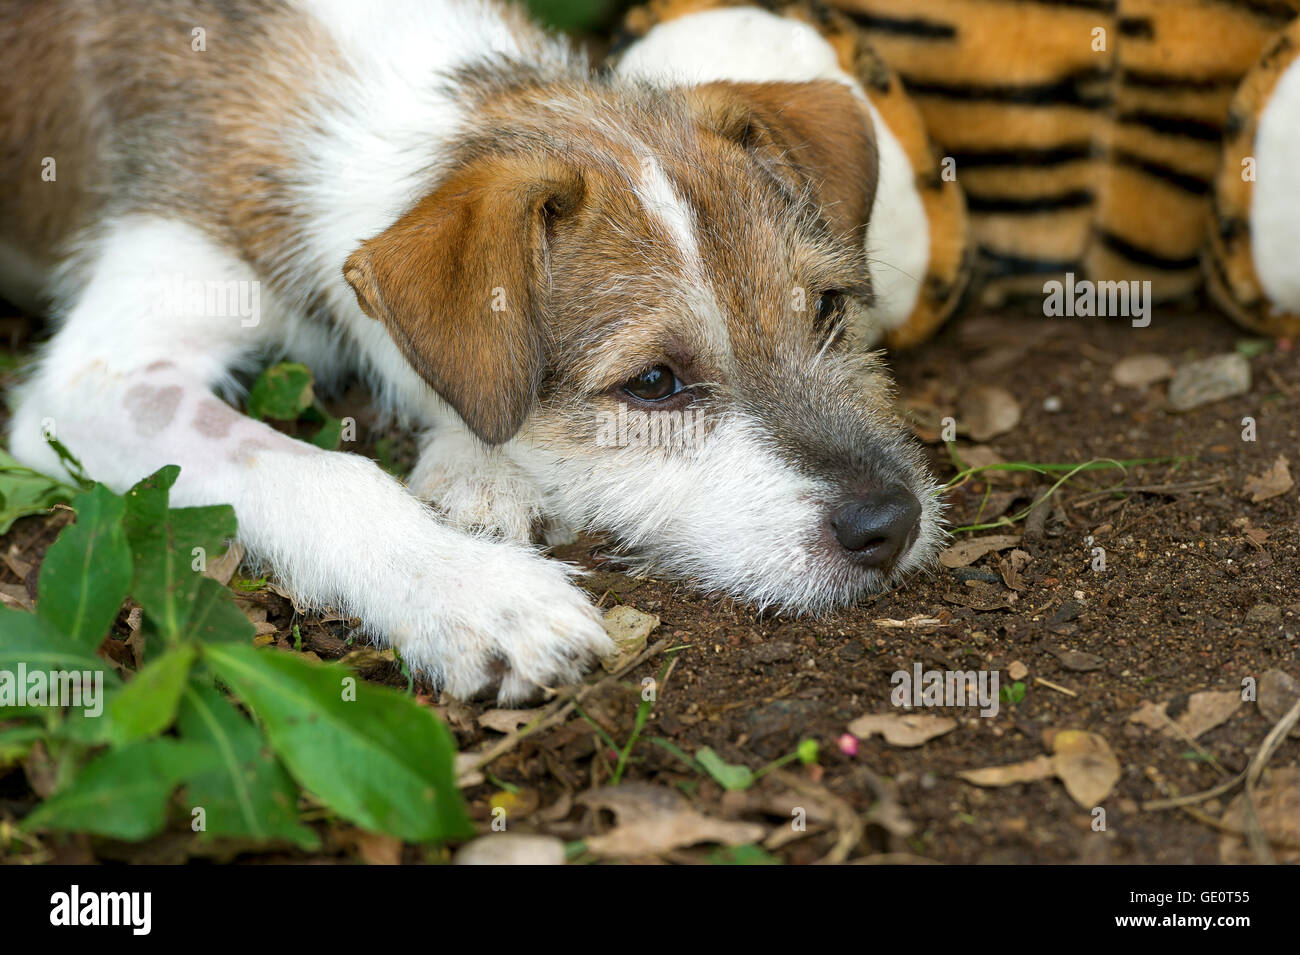 Sad dog is an adorable scruffy puppy looking very forlorn not wanting to play with his toy. Stock Photo